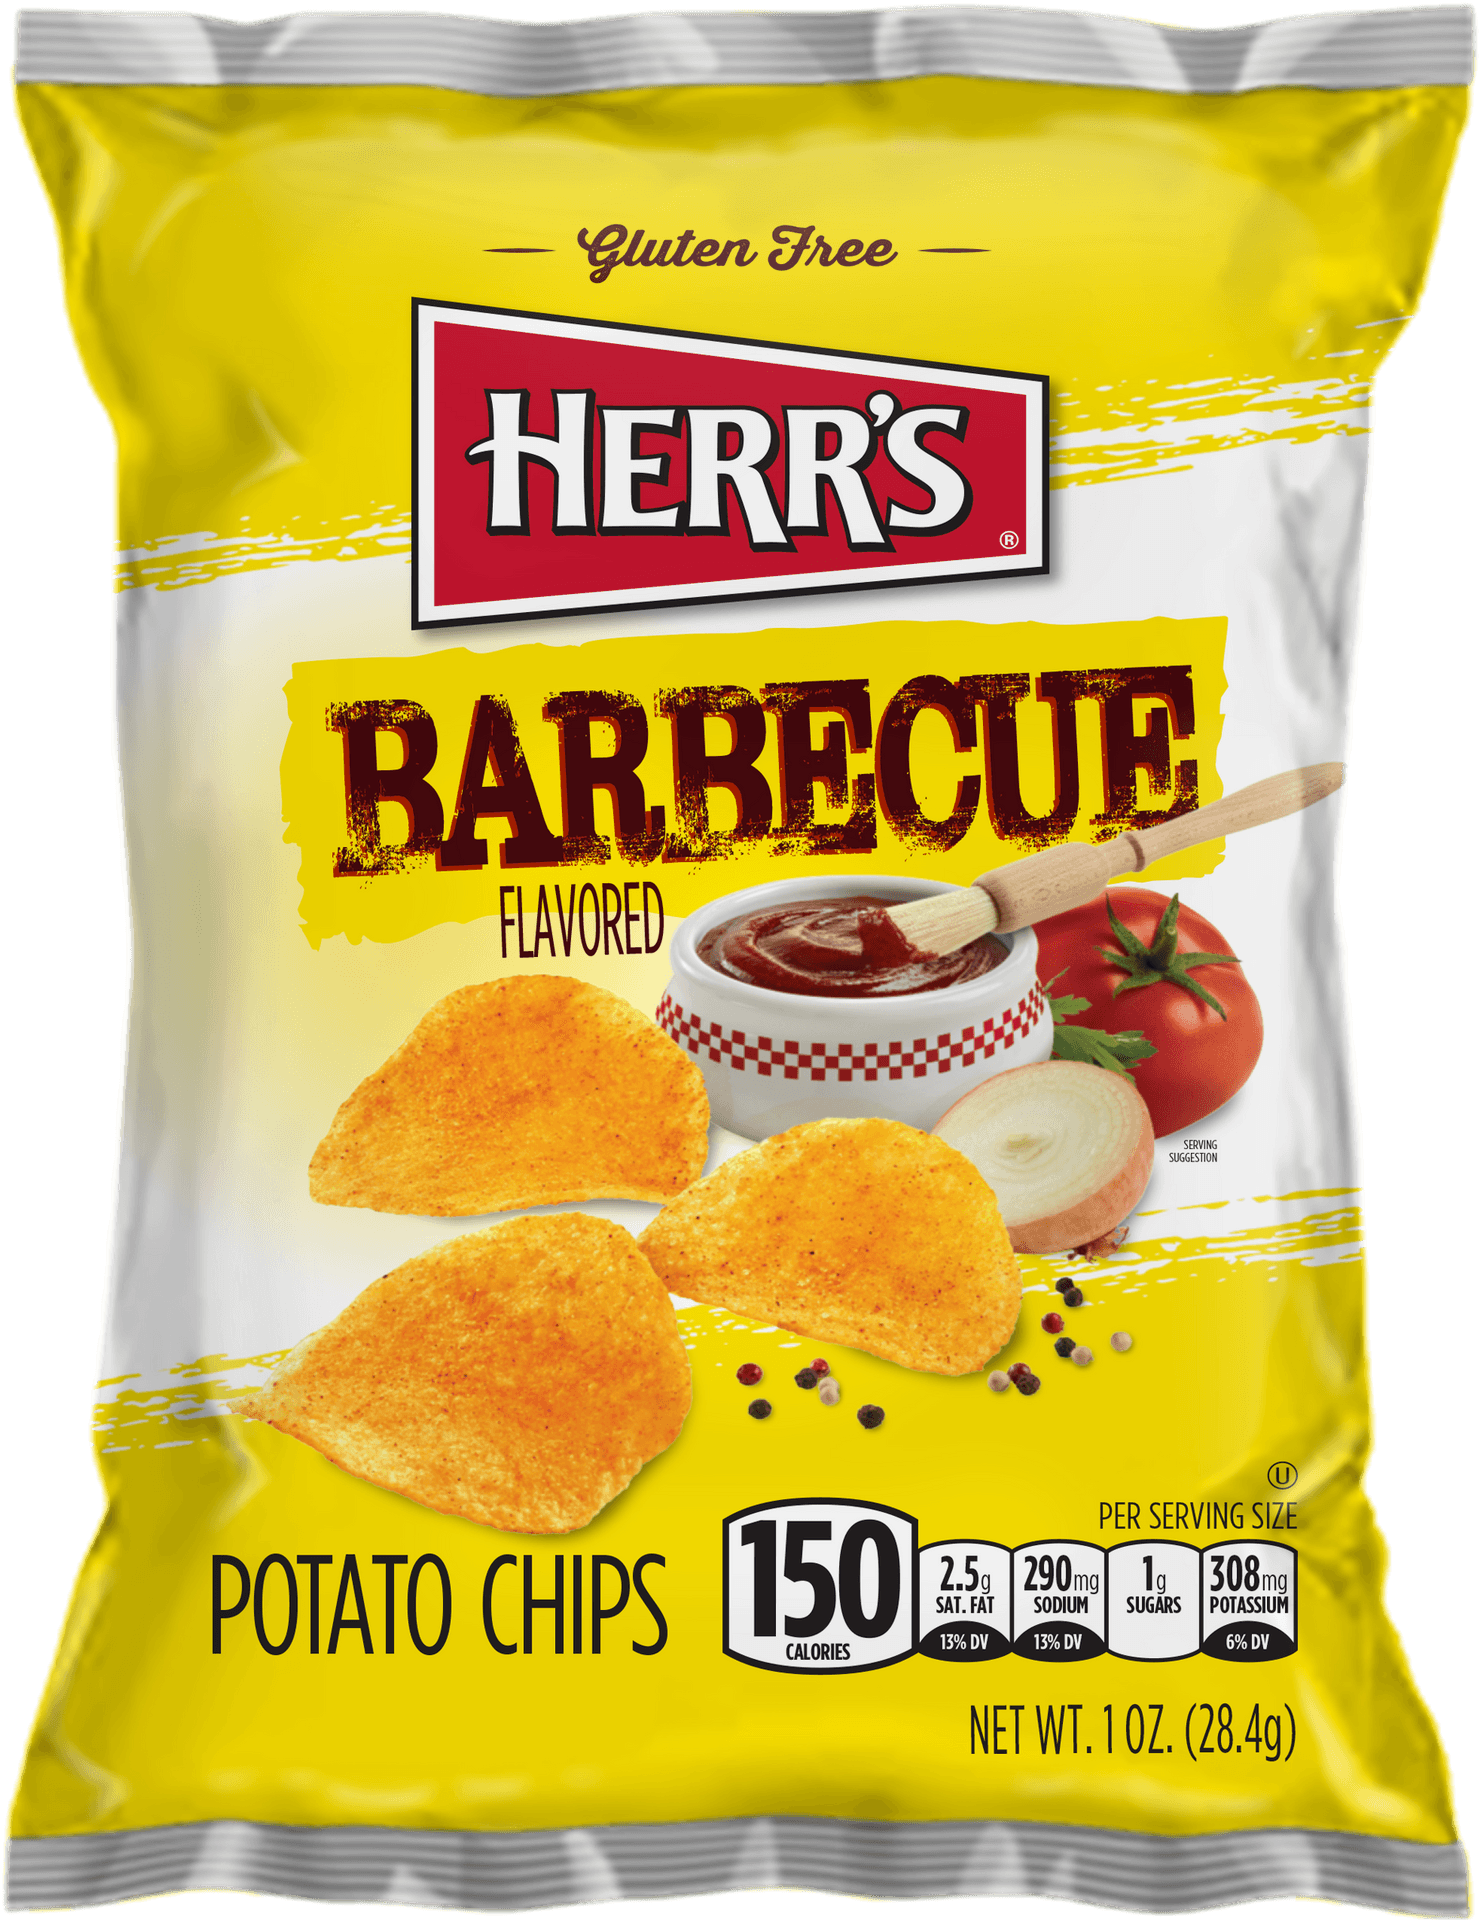 Herrs Barbecue Flavored Potato Chips Package PNG